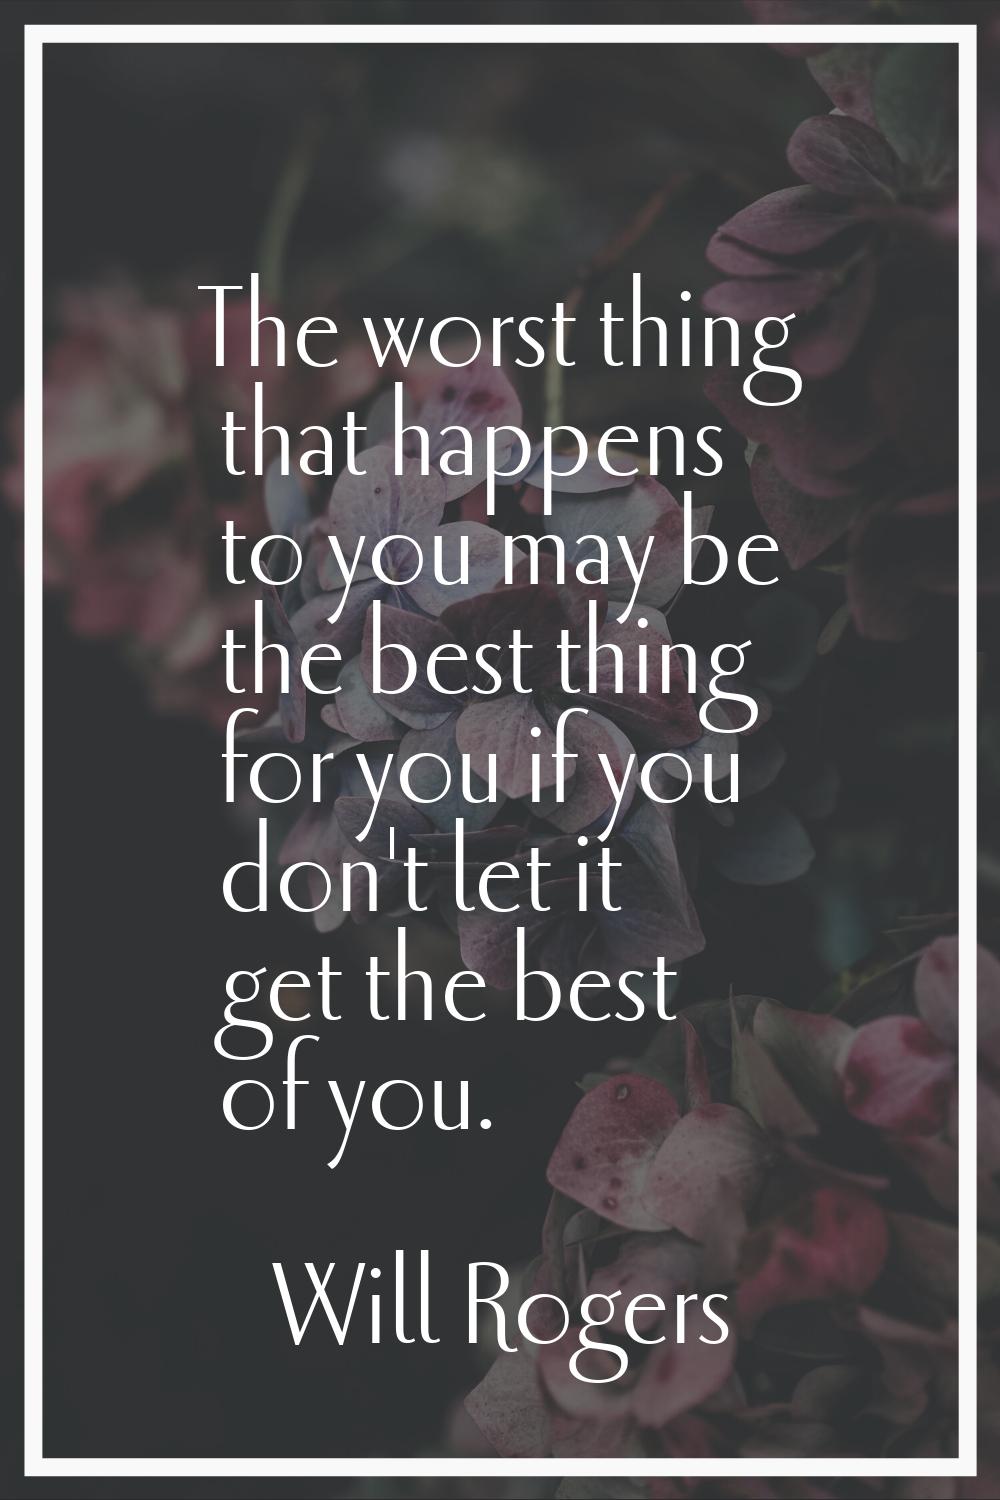 The worst thing that happens to you may be the best thing for you if you don't let it get the best 